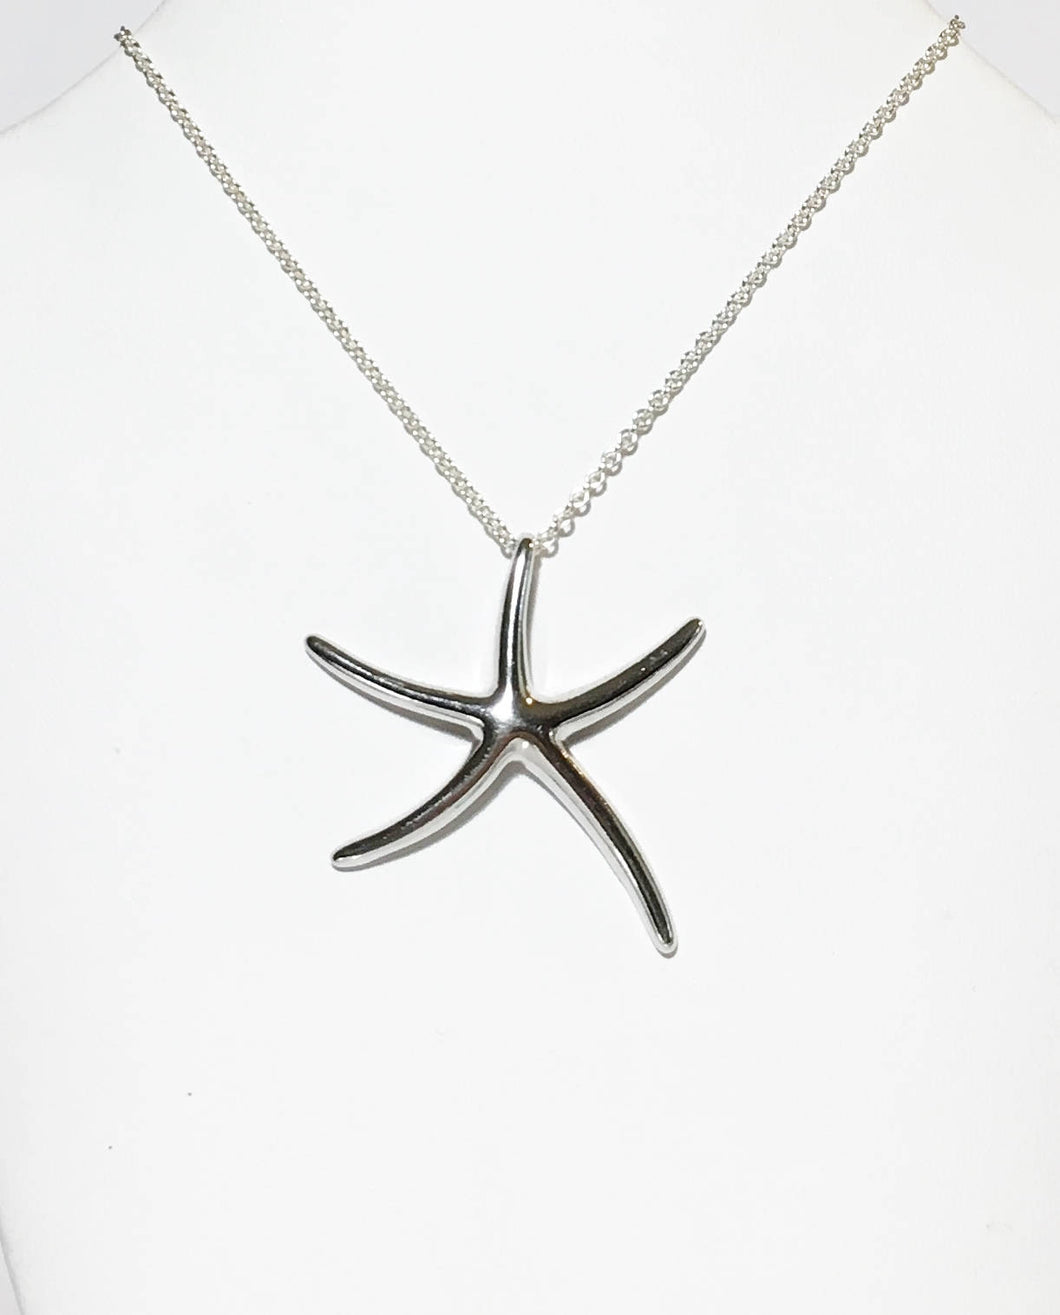 Silver Starfish Necklace, Sterling Silver Pendant, Summer Necklace, Gifts for Her, Dancing Starfish, Beach Jewelry - MiShelli